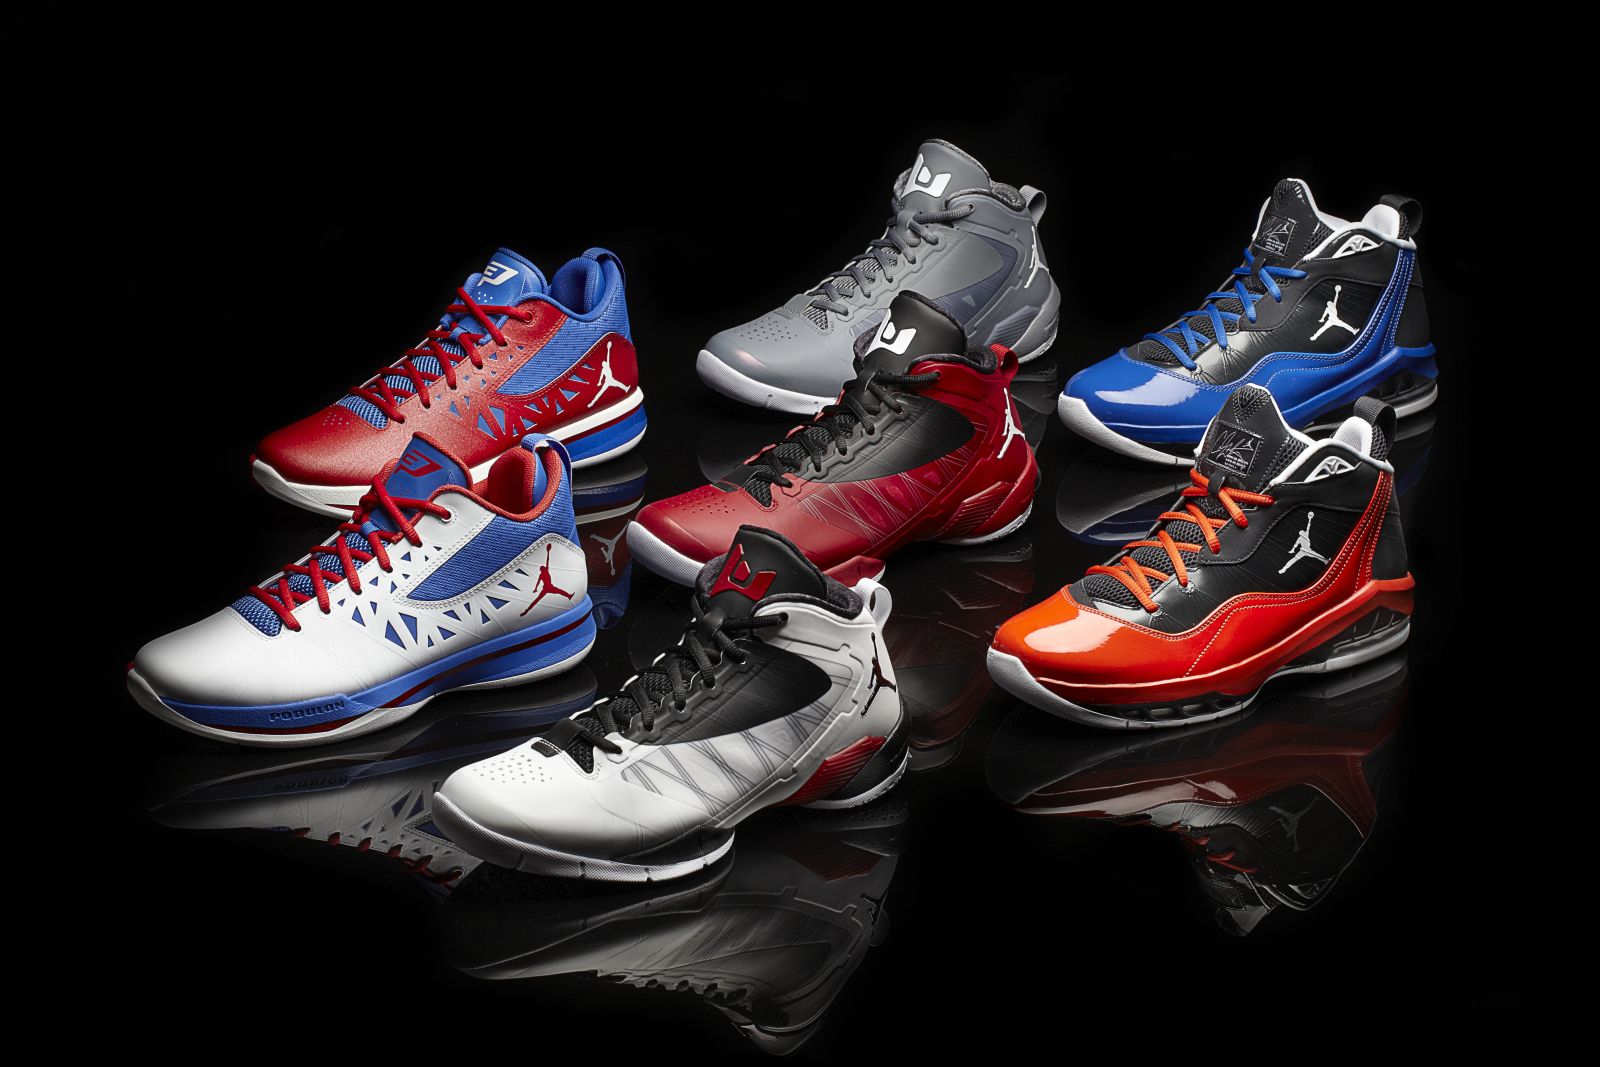 Jordan Brand Unveils Signature Footwear For The Playoffs | Sole Collector